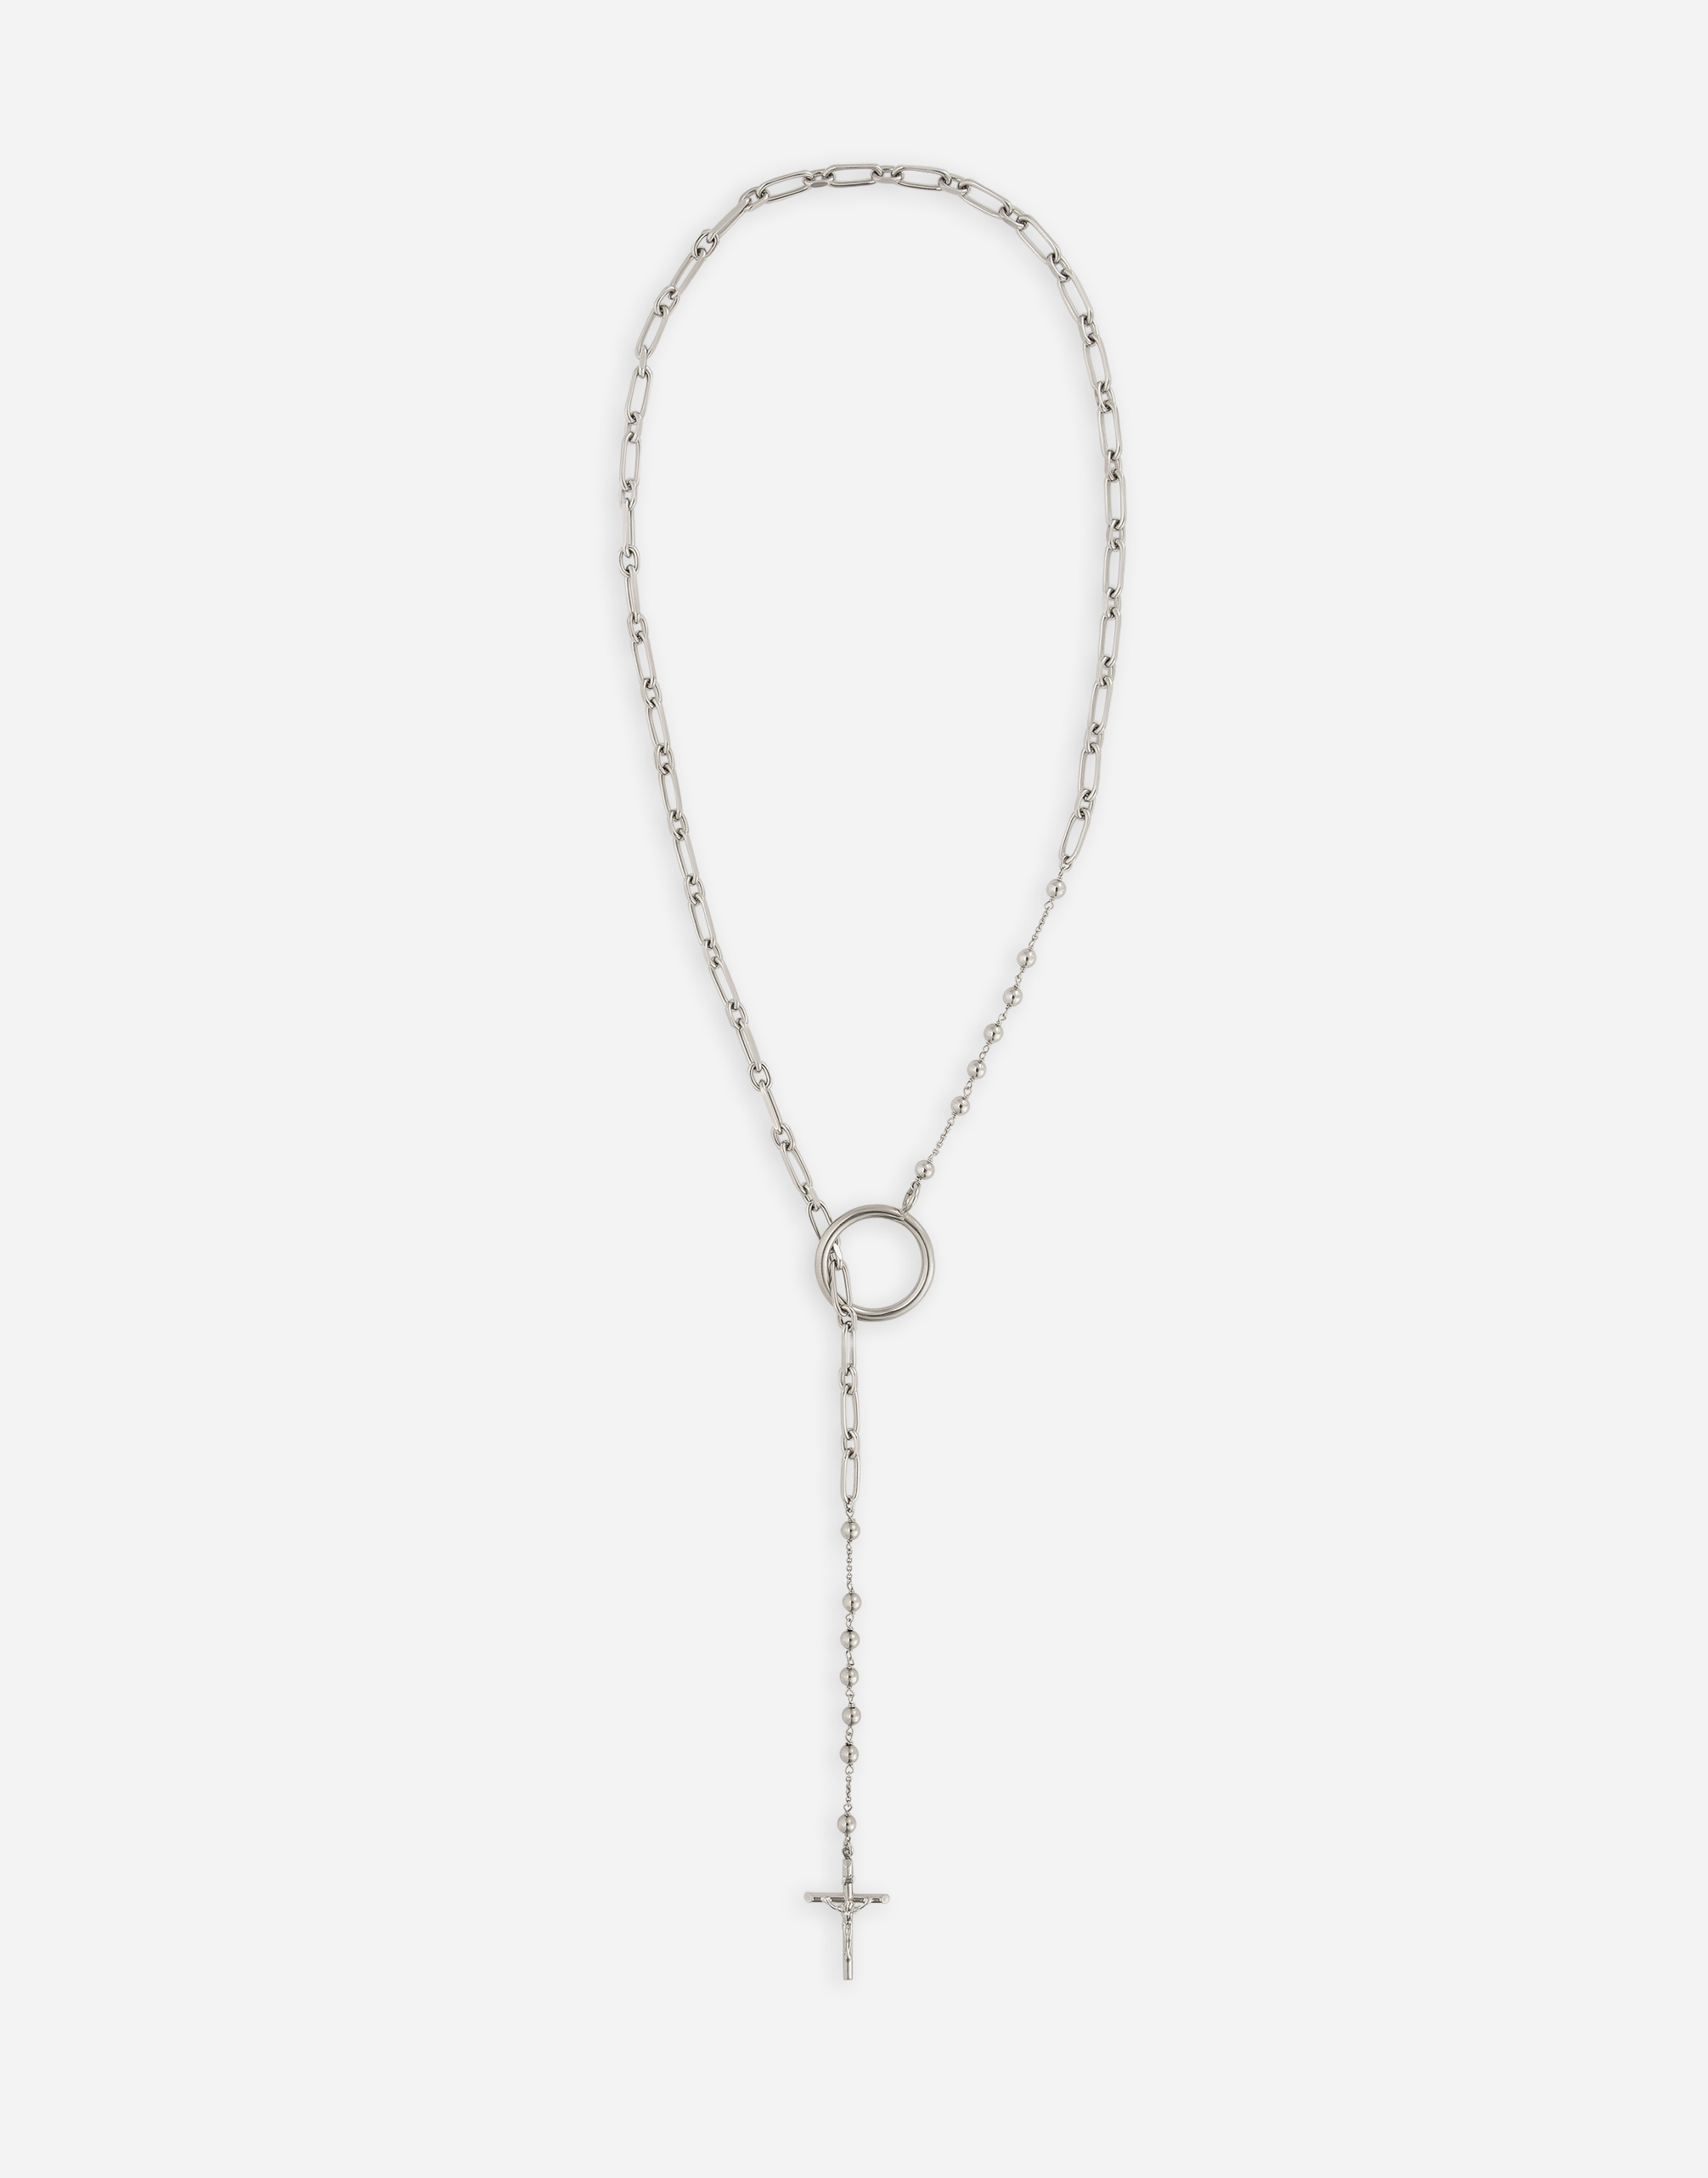 Rosary necklace with chain detailing in Silver